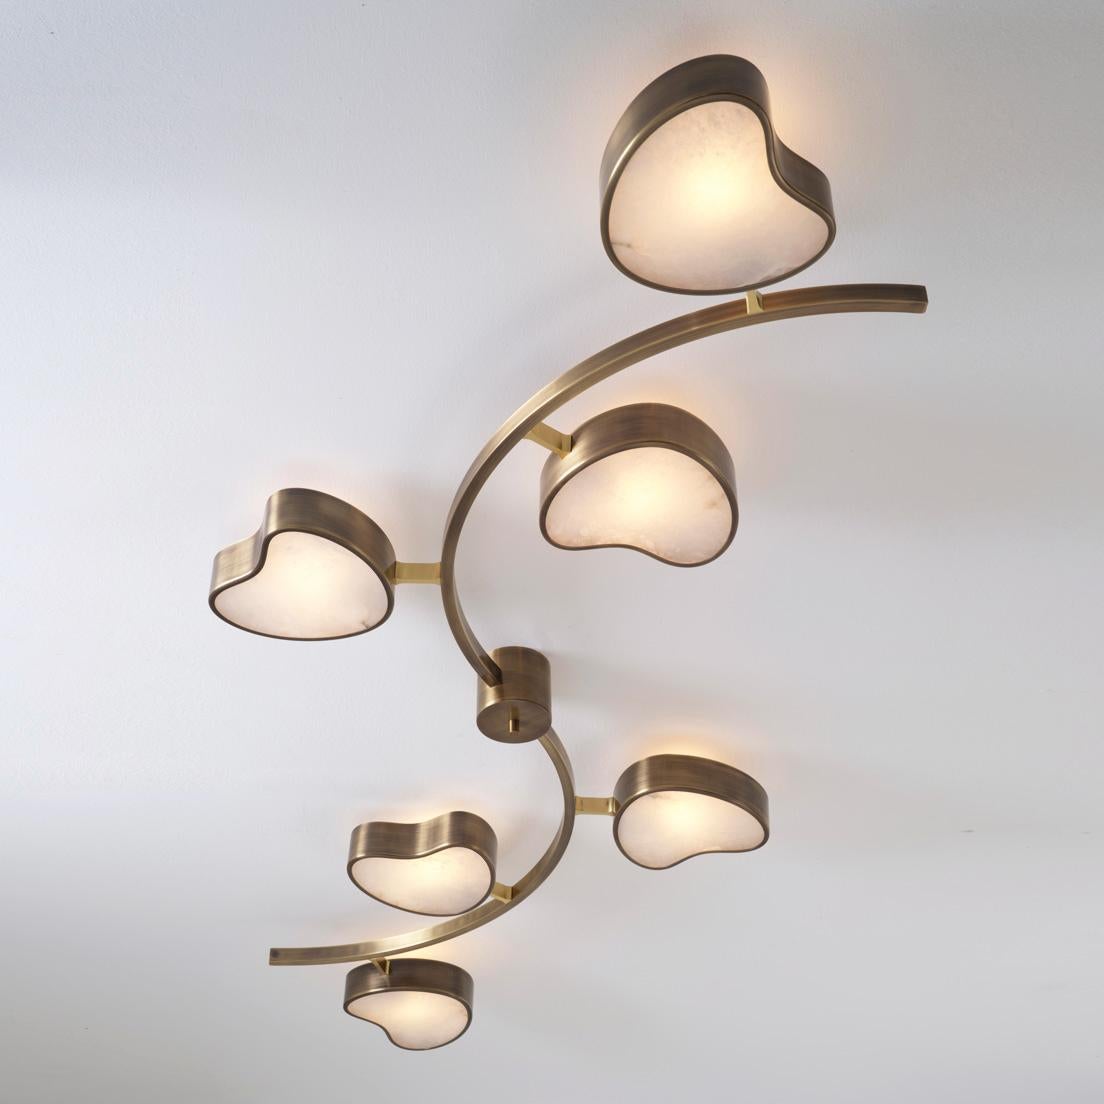 Cuore N.6 Ceiling Light by Gaspare Asaro. Peltro and Bronze Finish For Sale 6